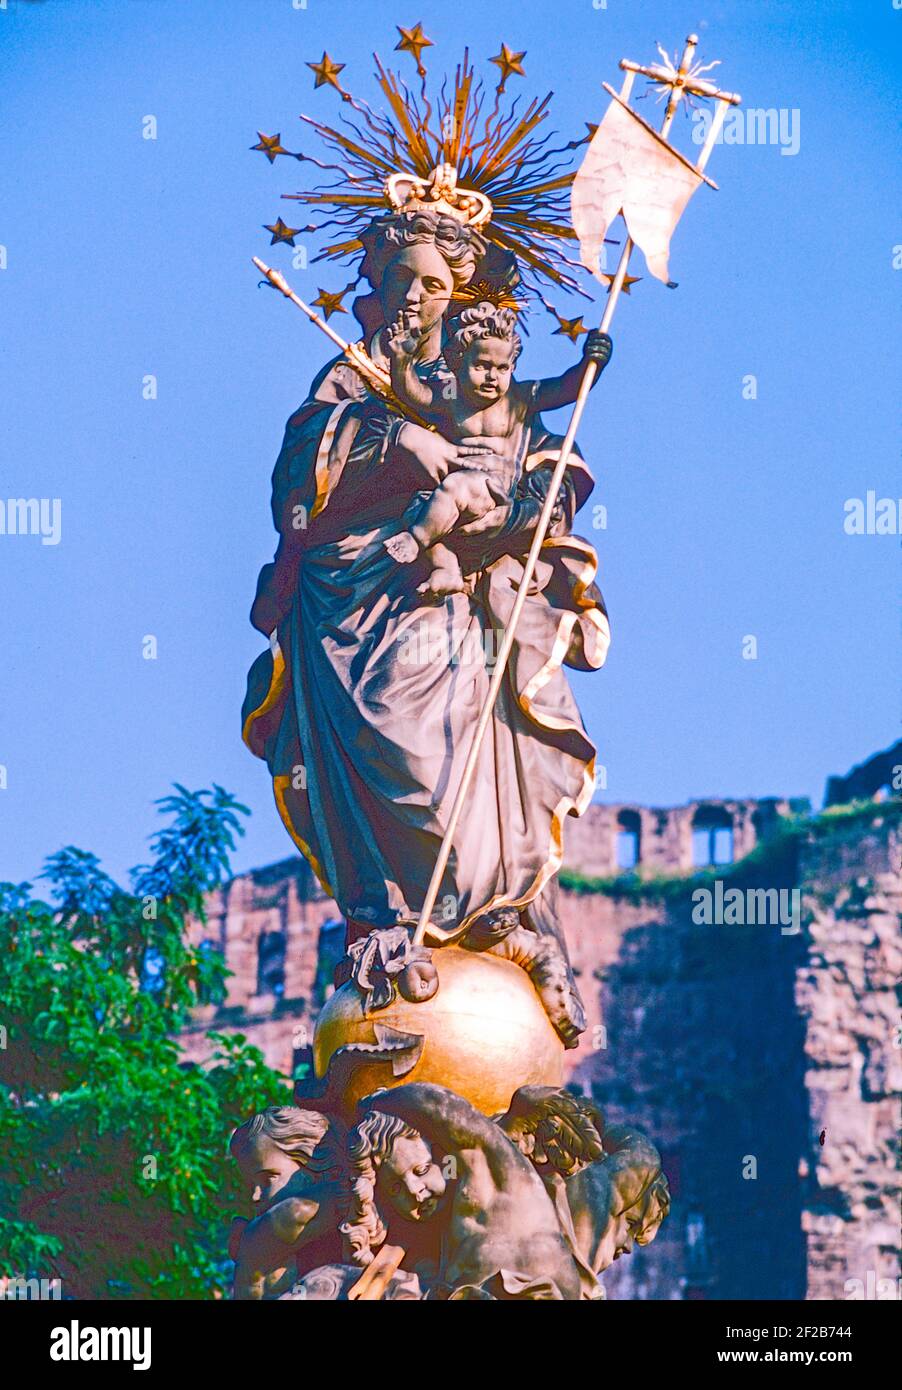 Heidelberg, Germany. The Kornmarkt (Corn Market) Madonna statue of 1718, erected by the Jesuits, in the Old Town. Stock Photo